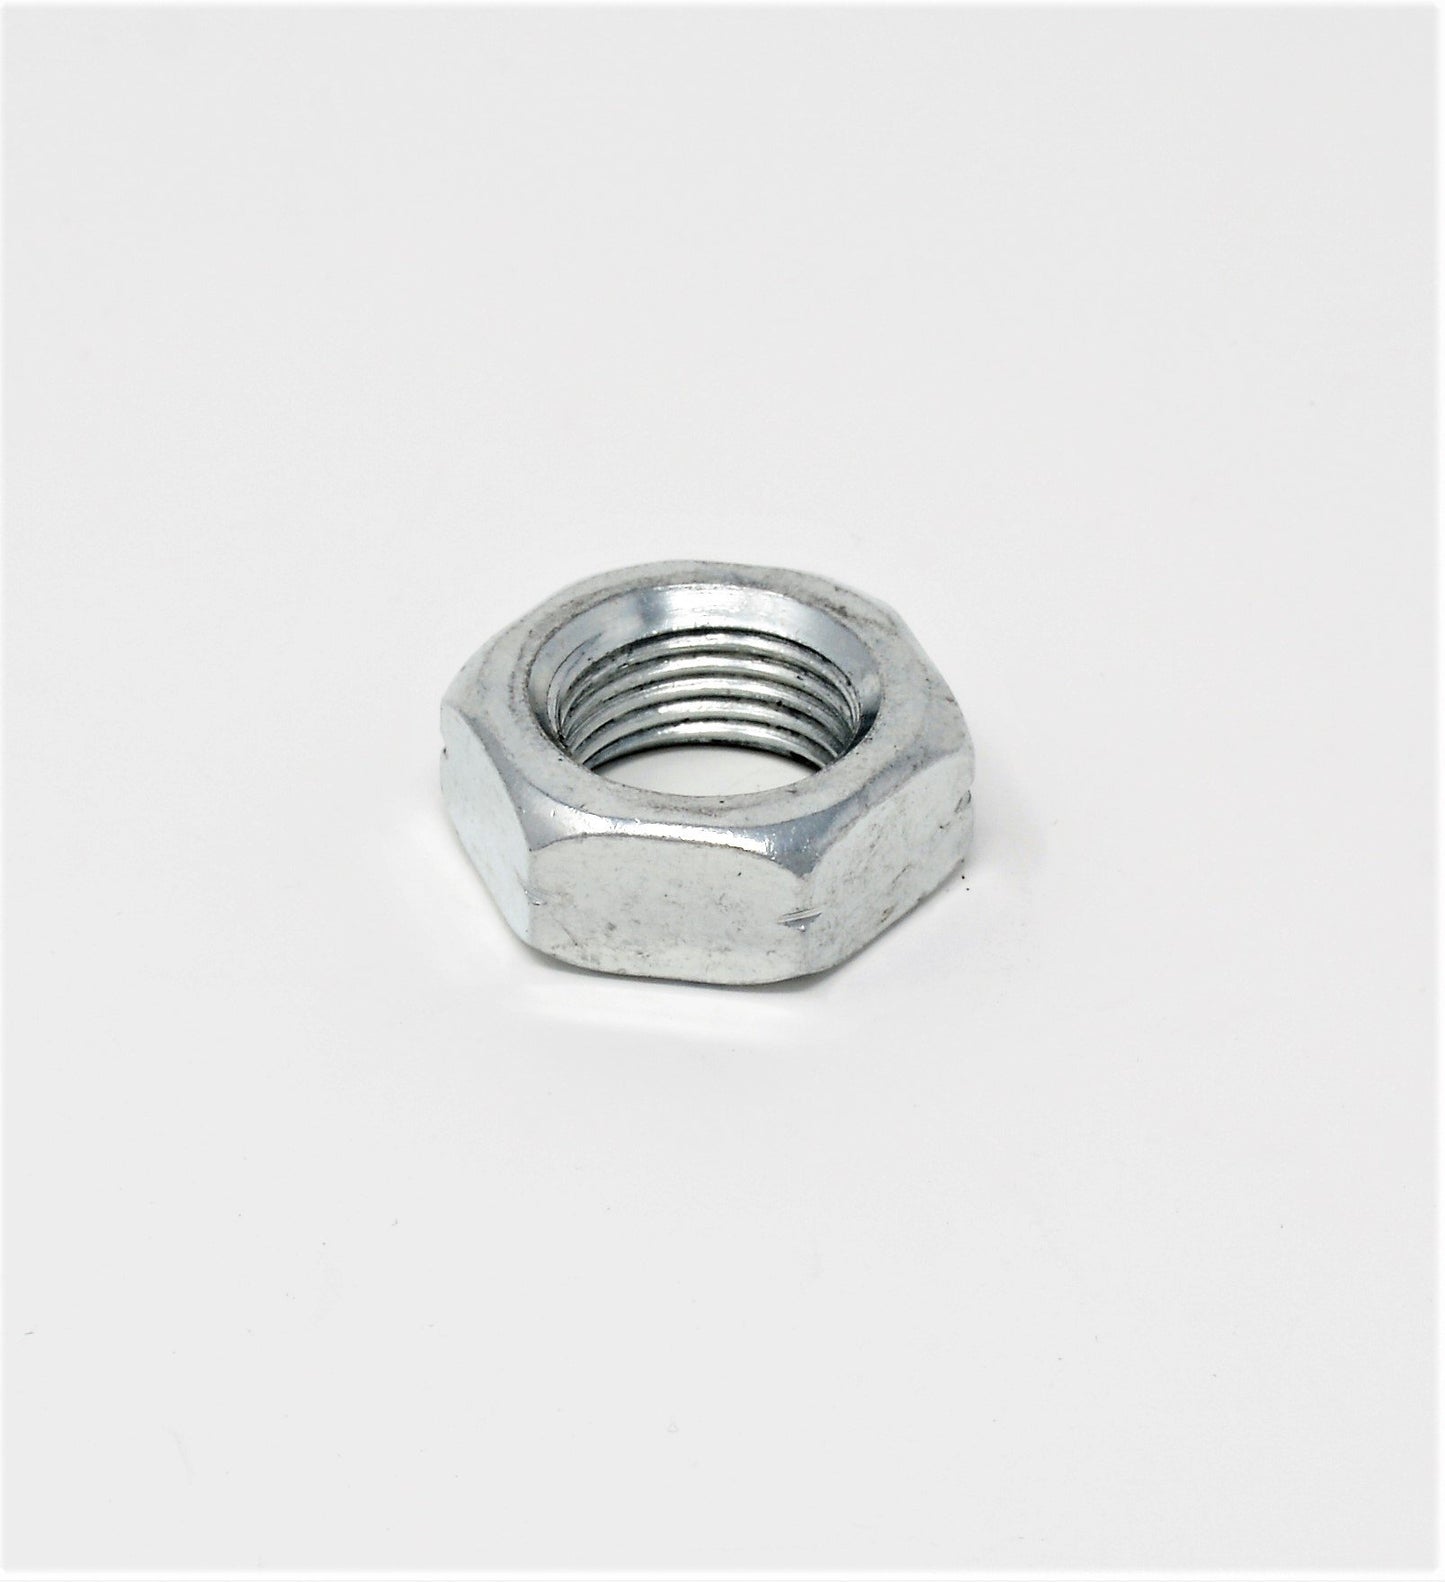 1.25” Rod End Heim Joint and Jam nut RIGHT hand (normal) thread